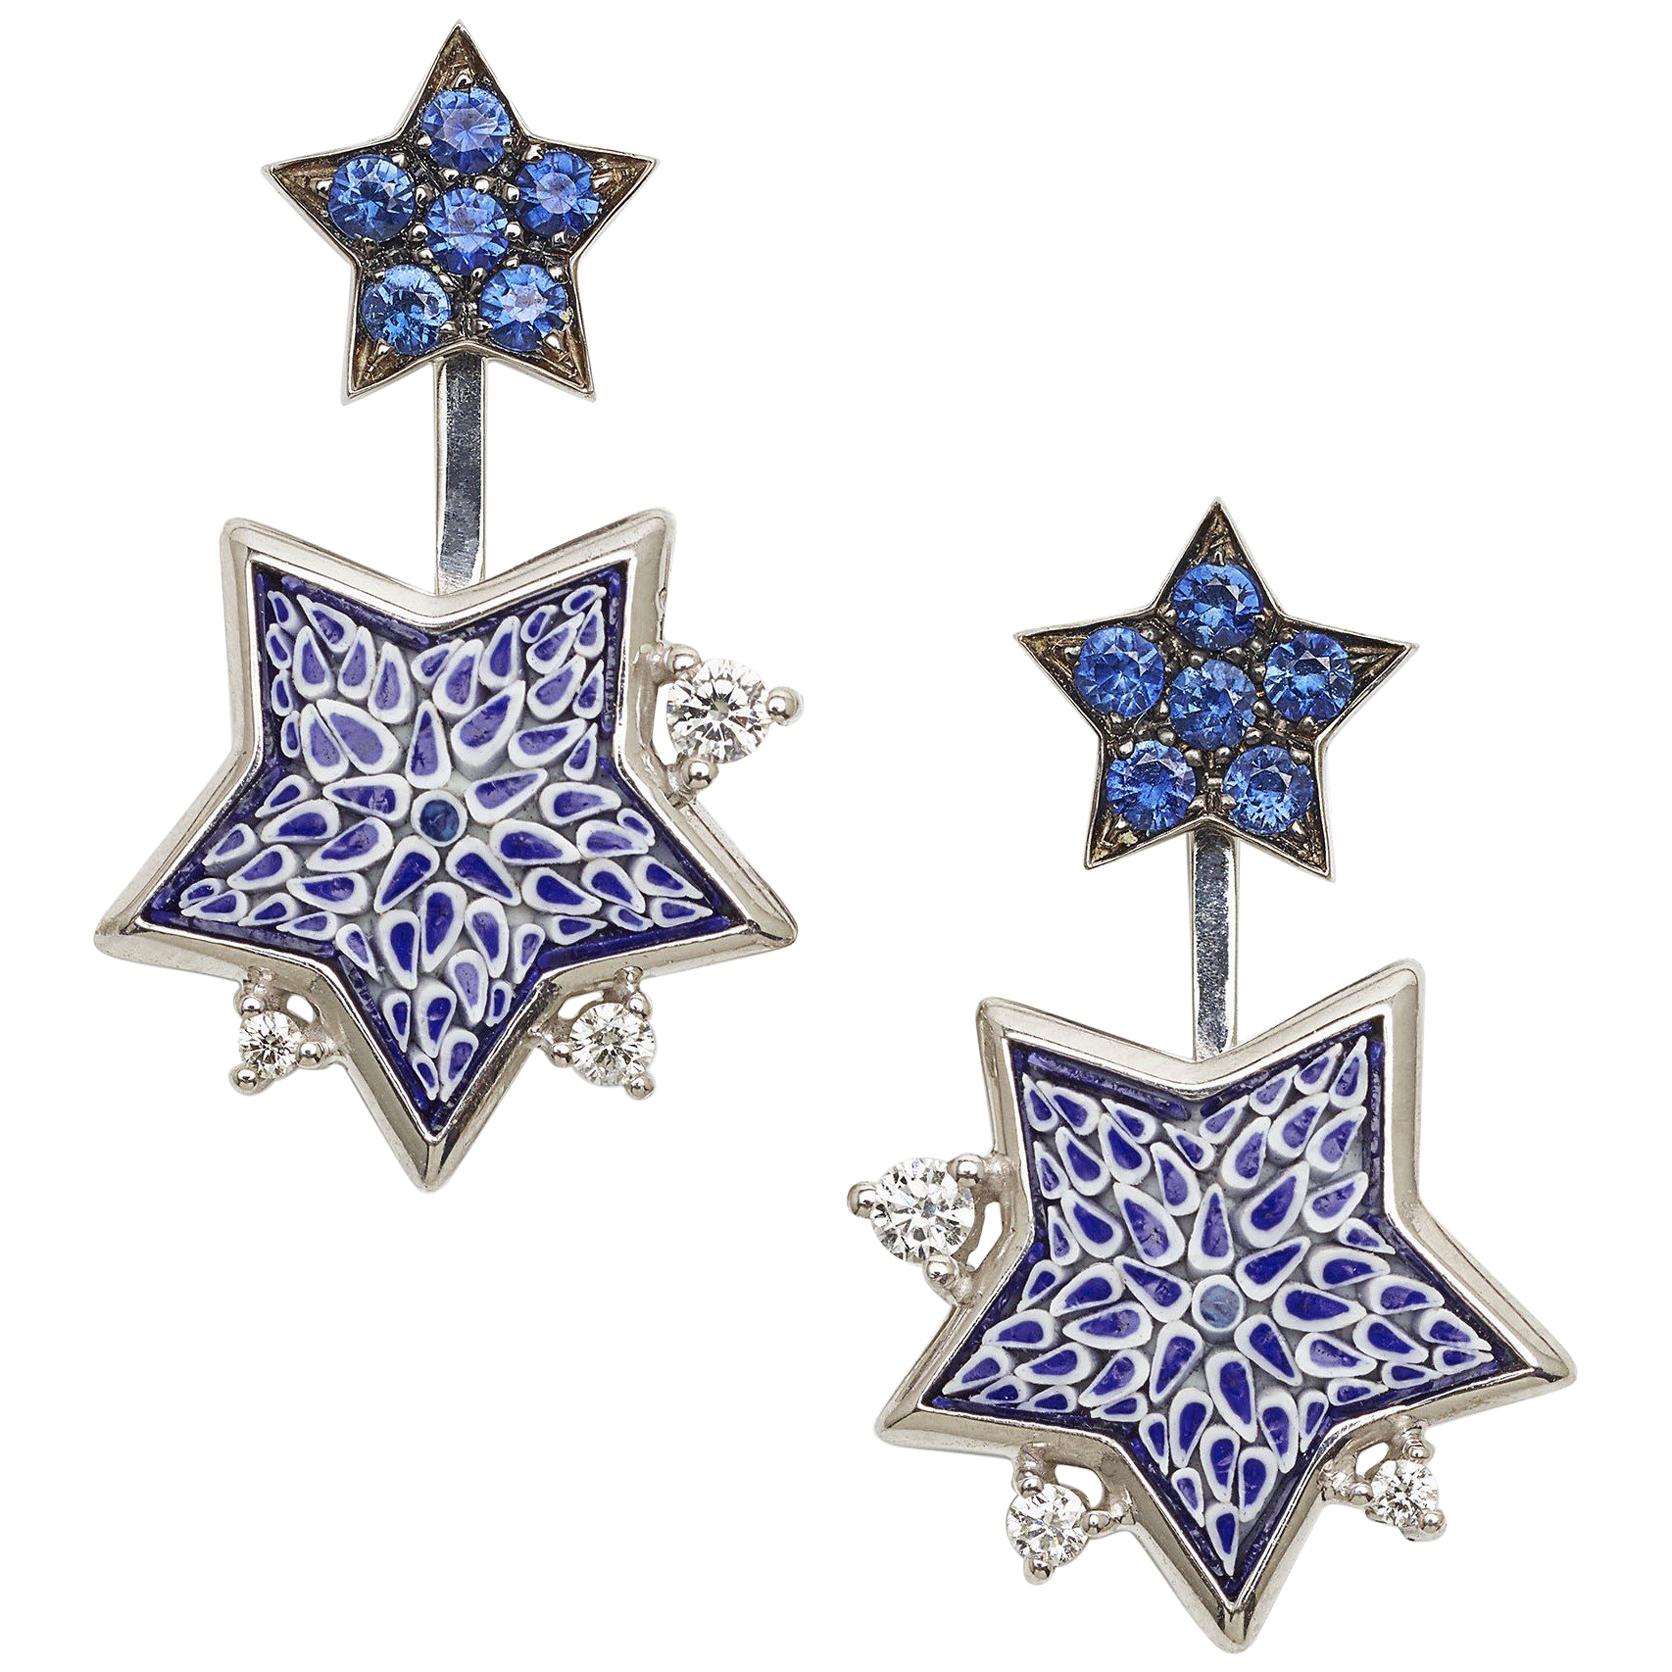 Earrings White Gold White Diamonds Blue Sapphires HandDecorated with Micromosaic